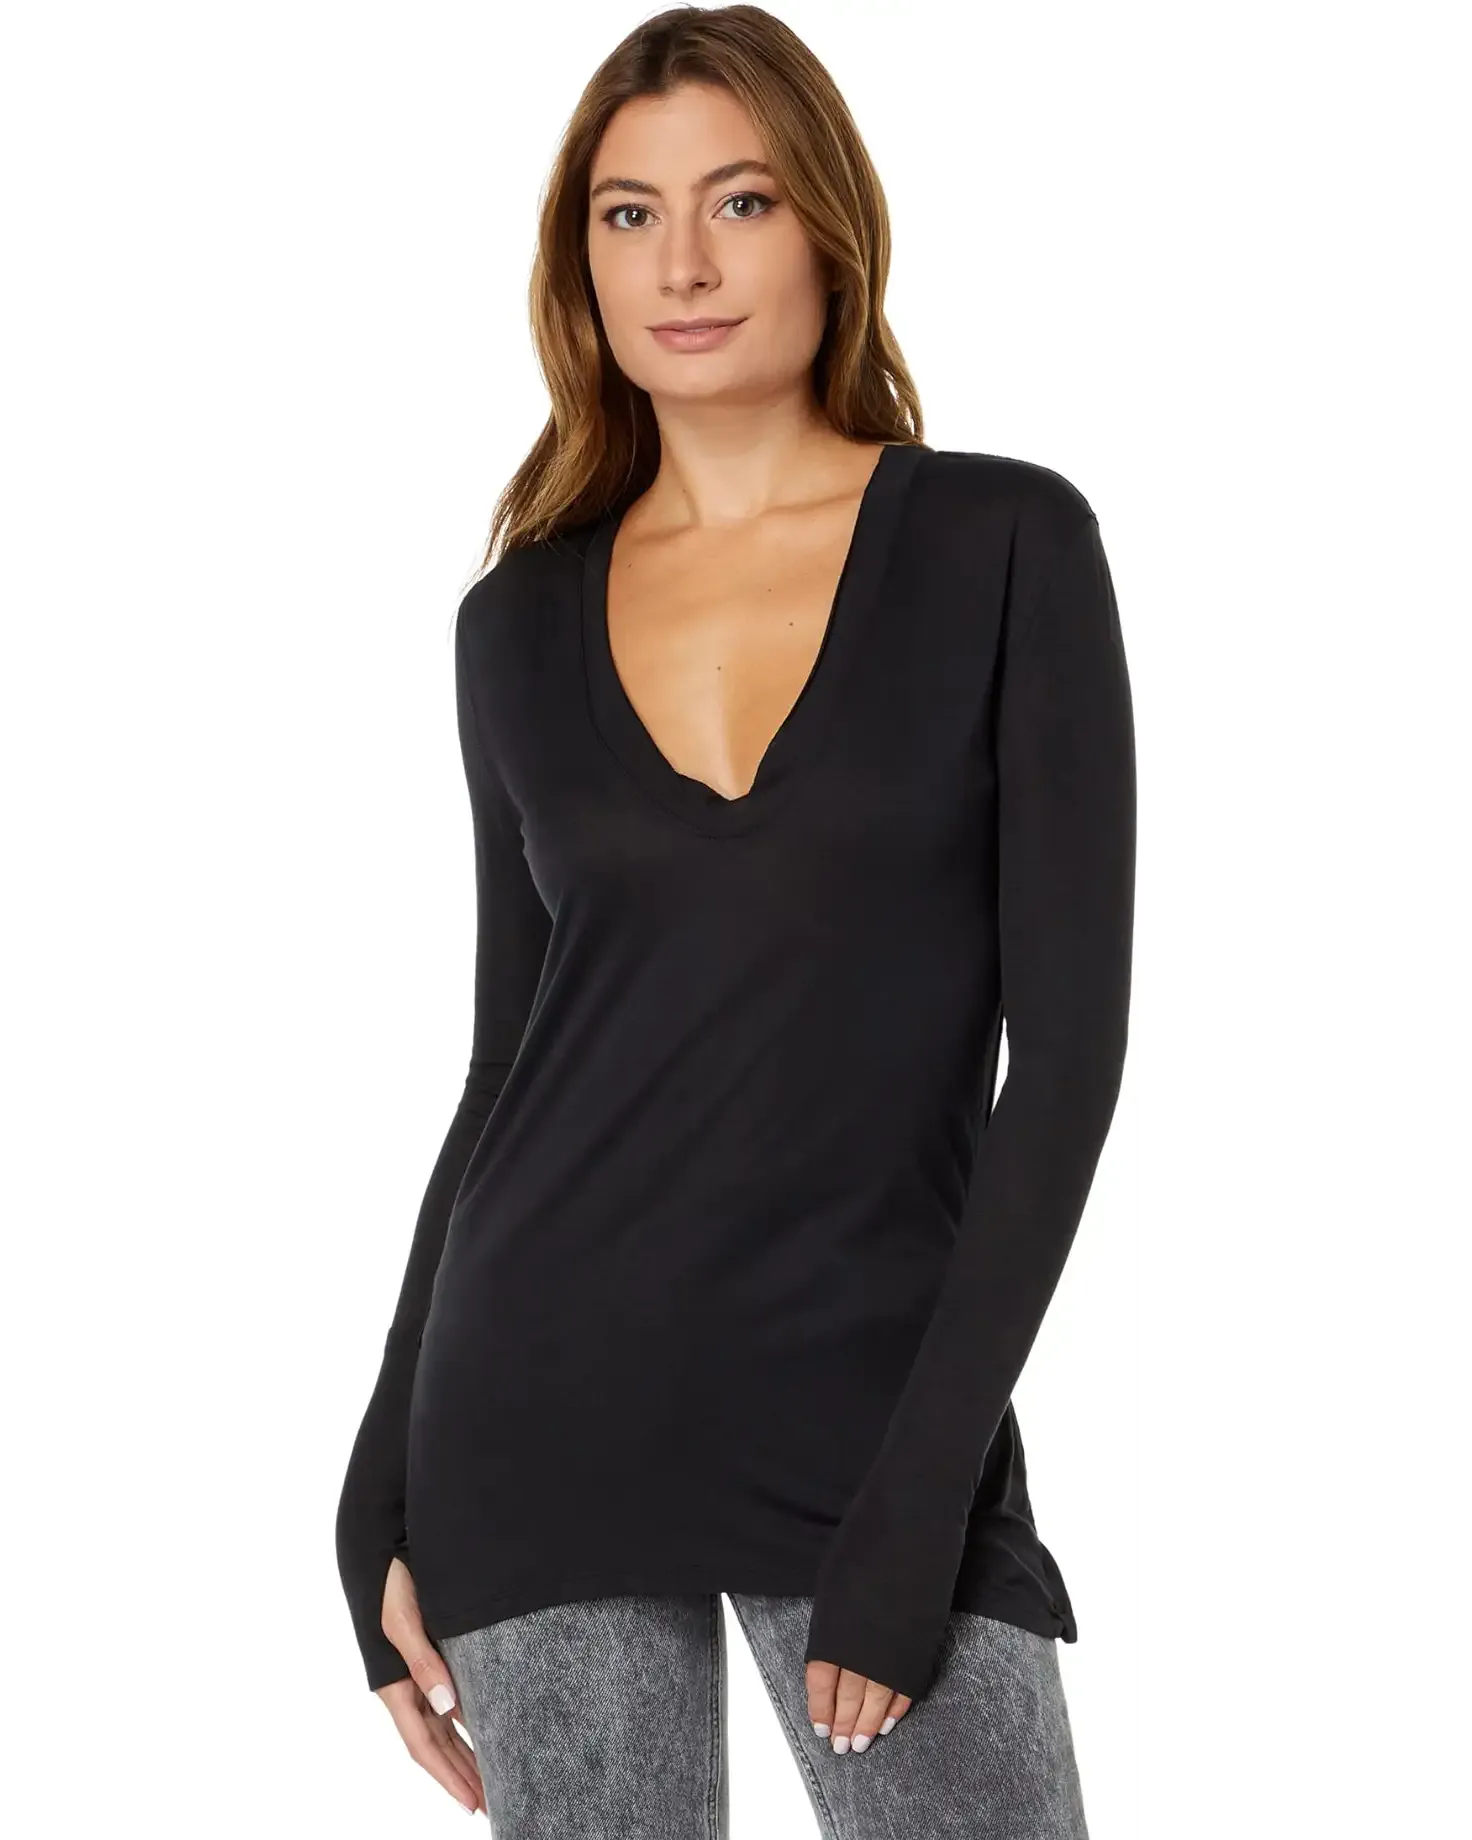 FREE PEOPLE Seamless Have It All Womens Long Sleeve Top - WASHED BLACK